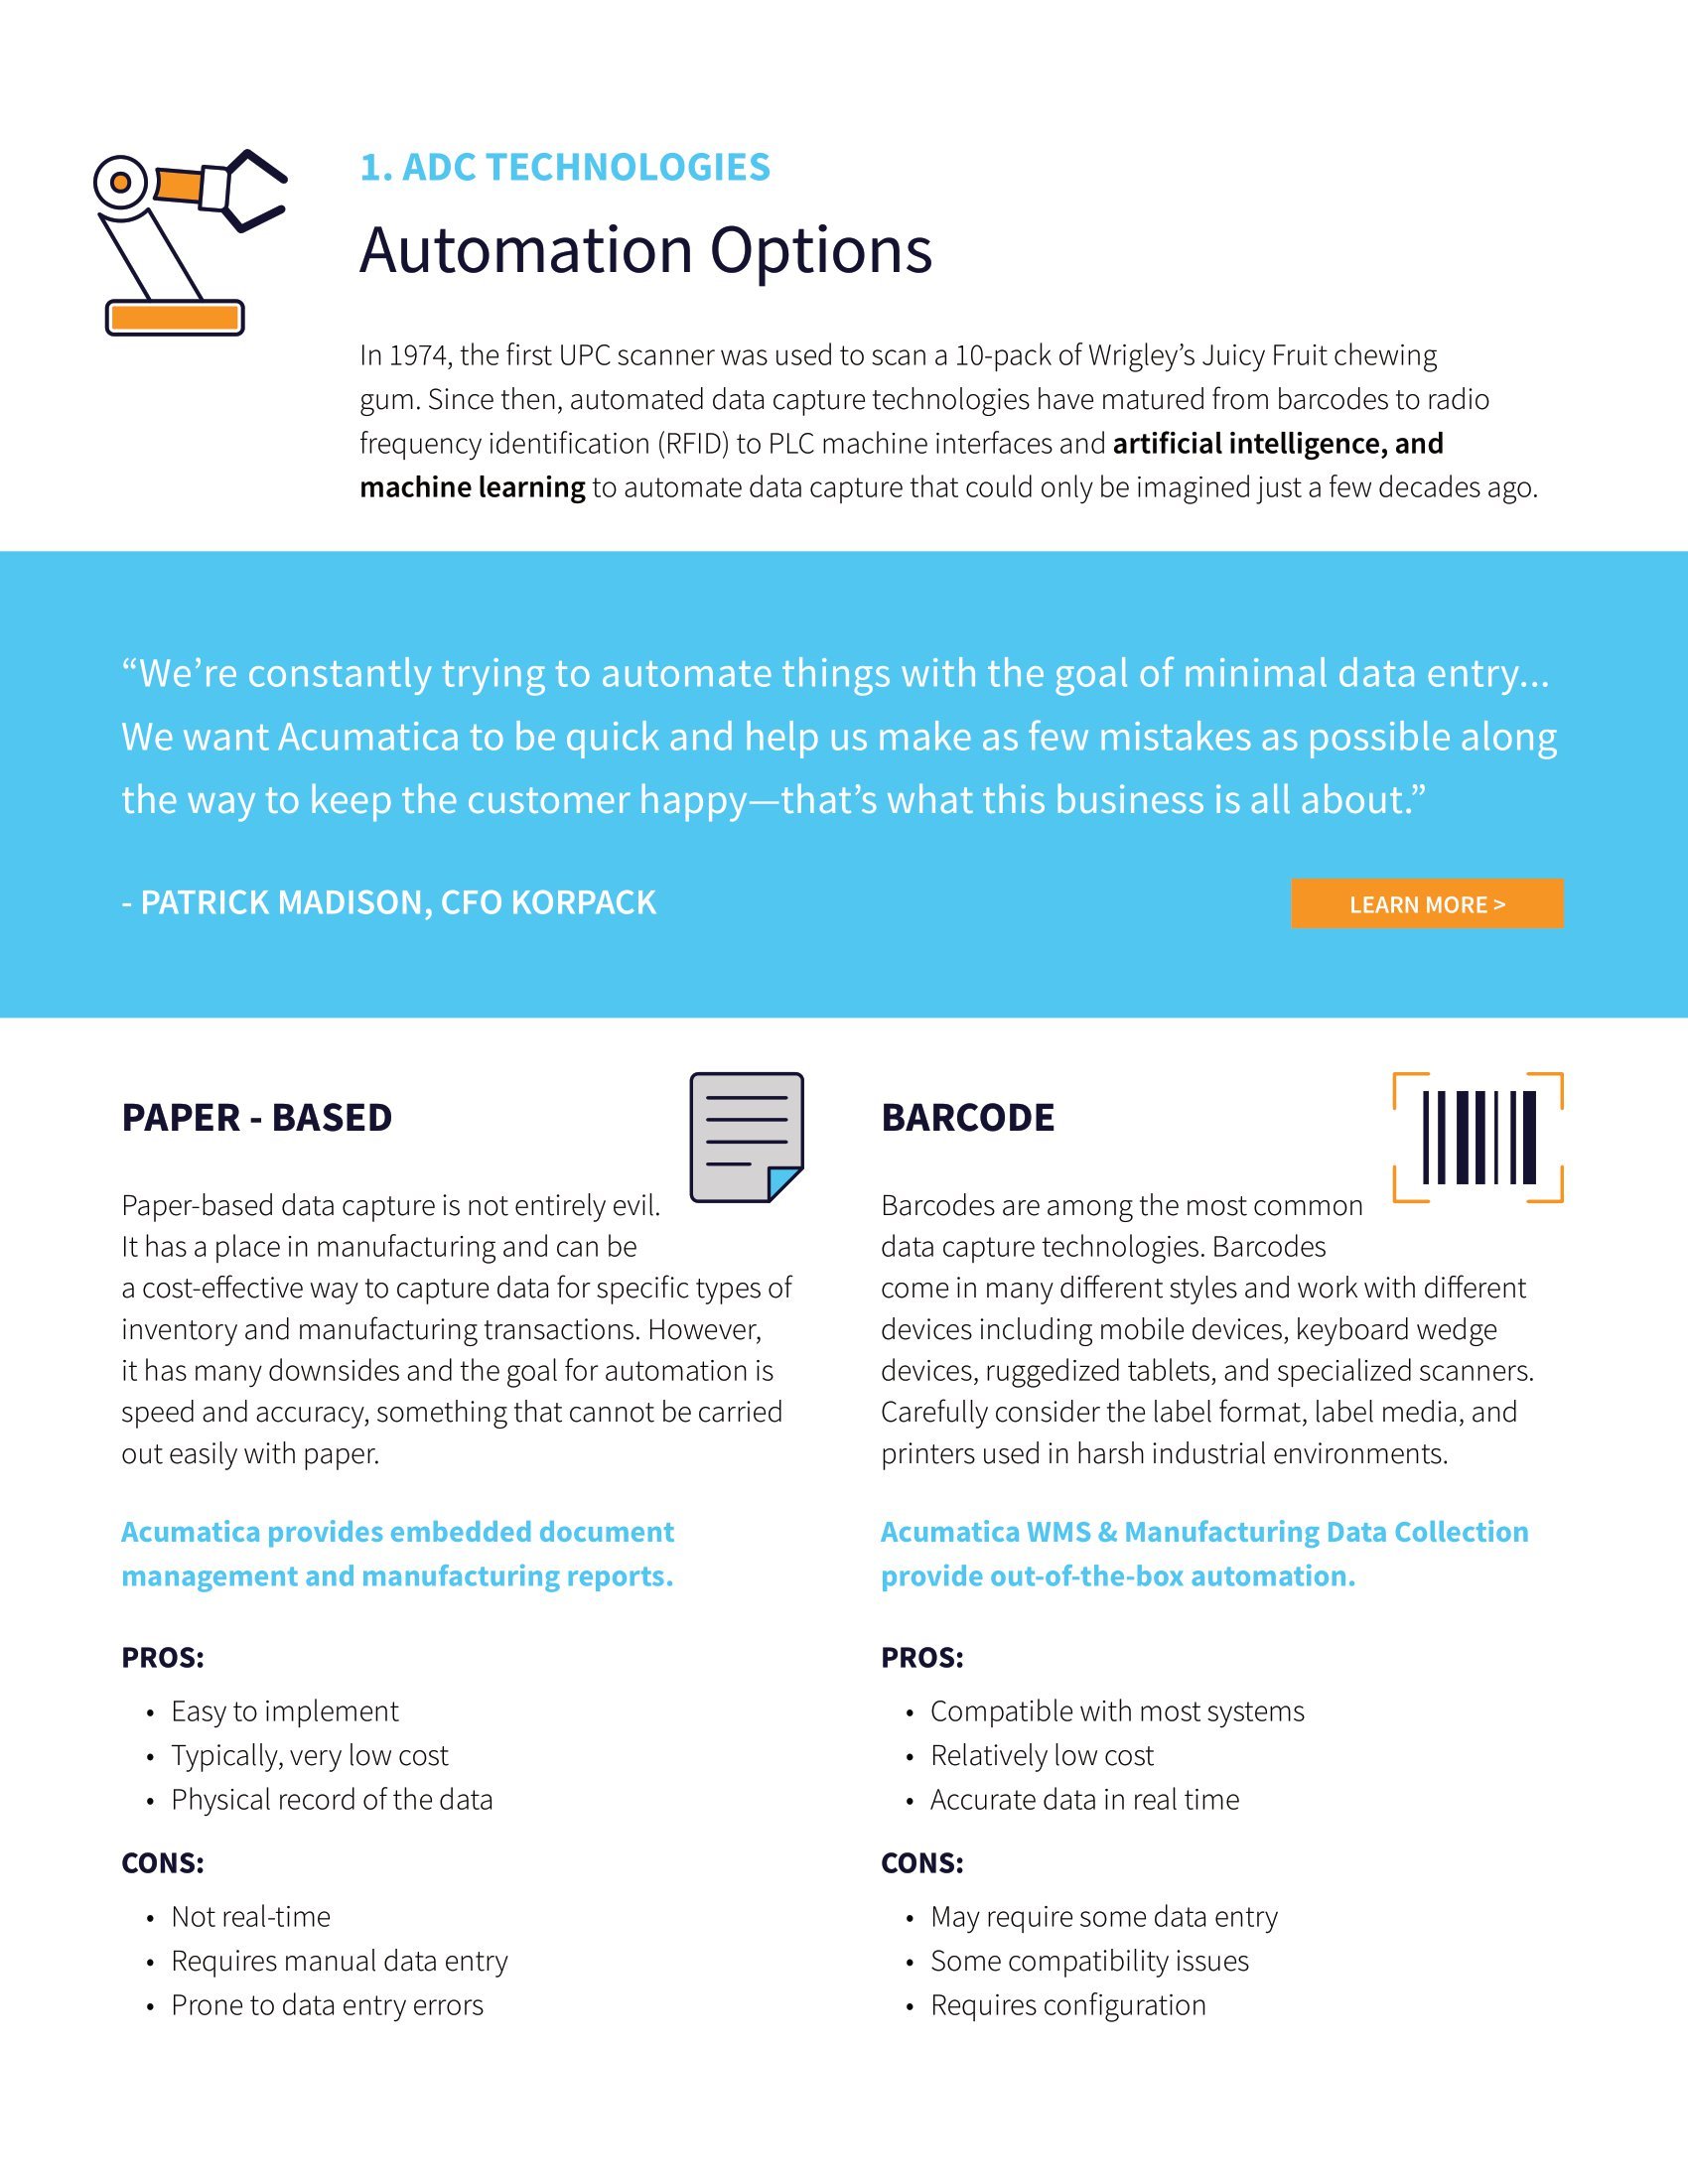 Automated Data Capture for Manufacturers, page 2